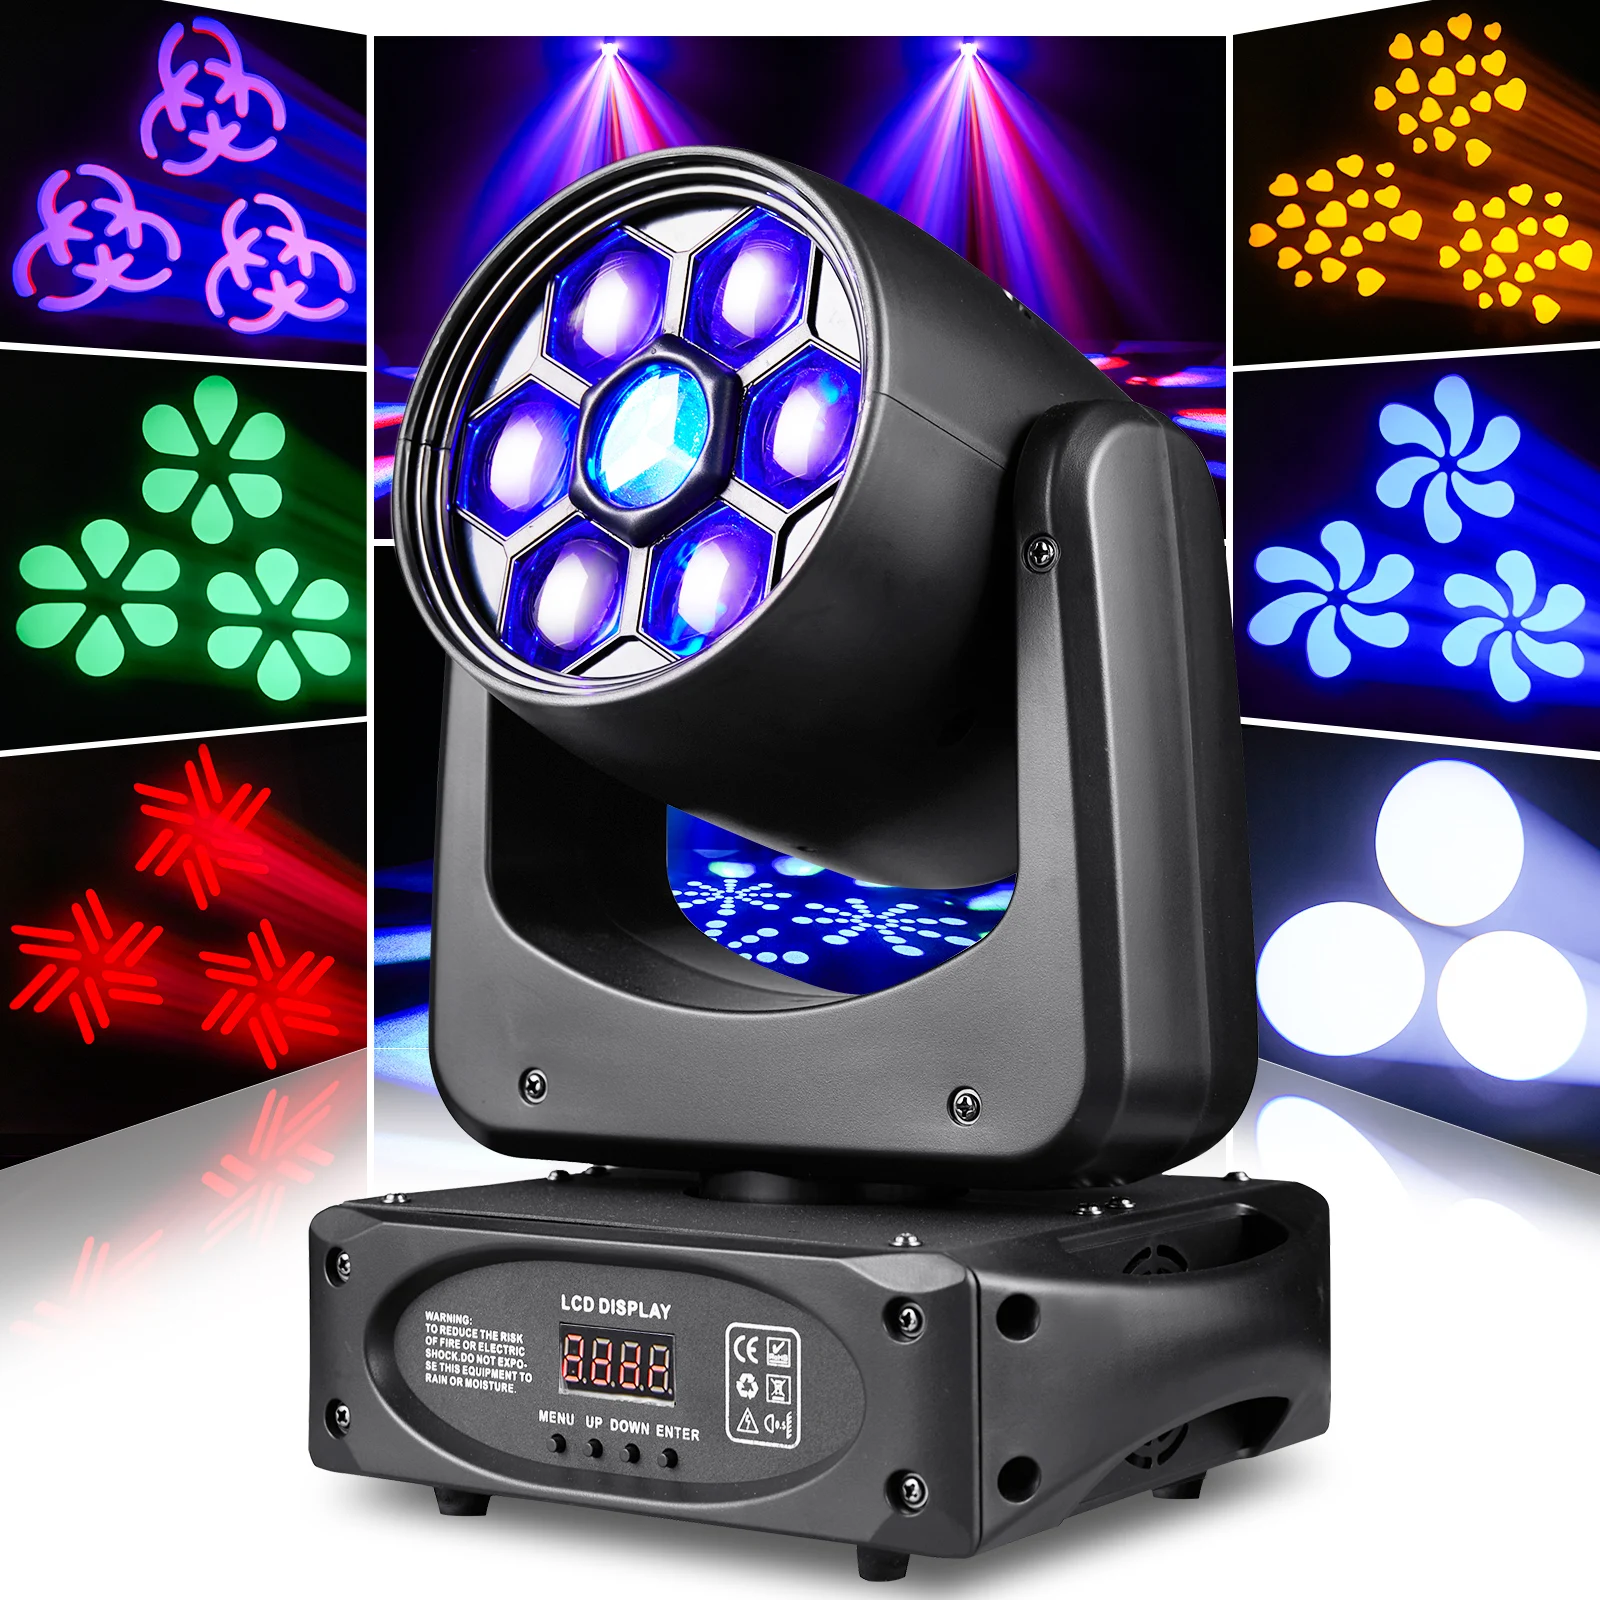 

U`King 150W Rgbw 8 Patterns 8 Colors Stage Lamp Luces De Escenario For Disco Party Club Bar Show Moving Head Lights